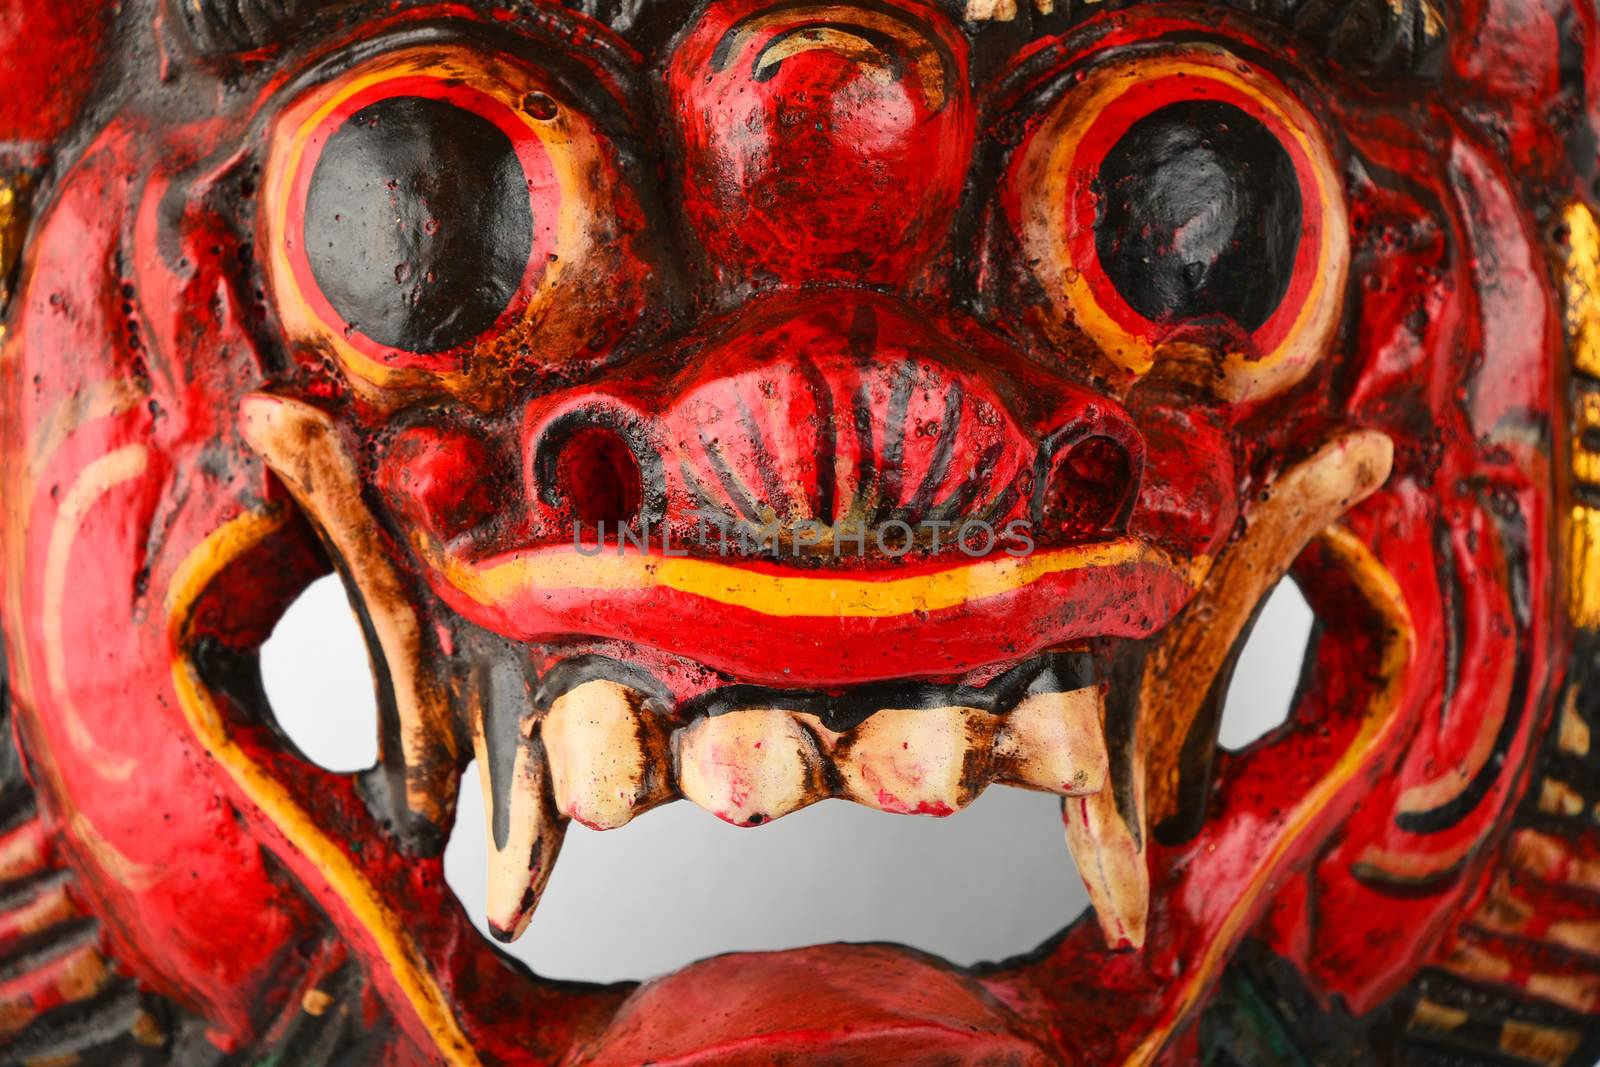 Asian traditional wooden red painted demon mask by BreakingTheWalls